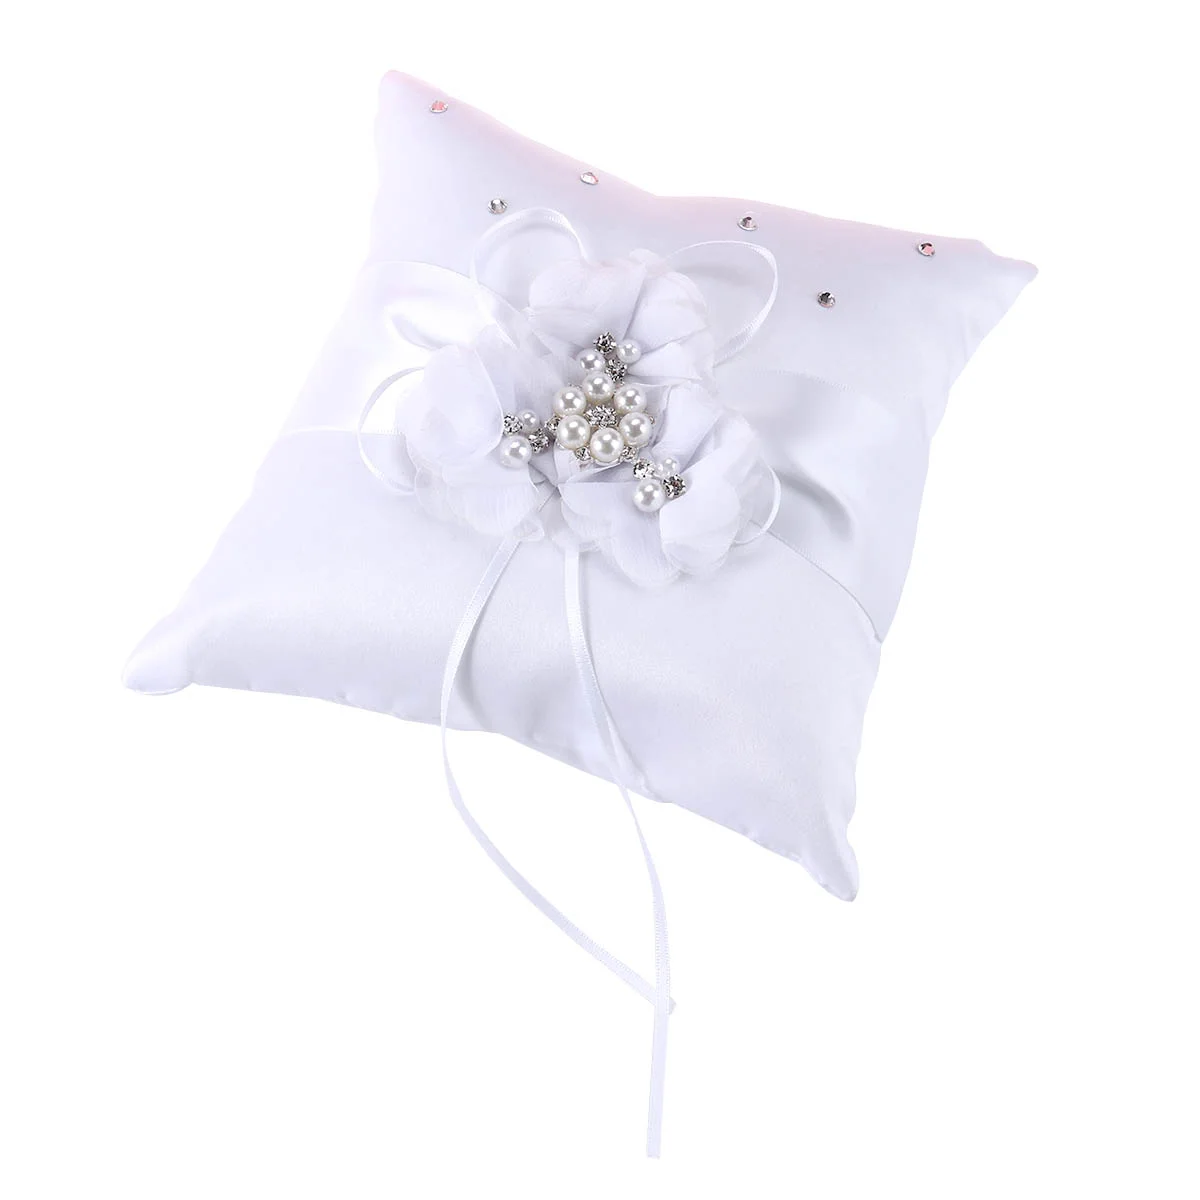 

Ring Pillow Wedding Bearer Pillows Box Ceremony Ribbon Pearl Cushion Holder Flower Bow Sign Rhinestone Barrier Gifts Anniversary